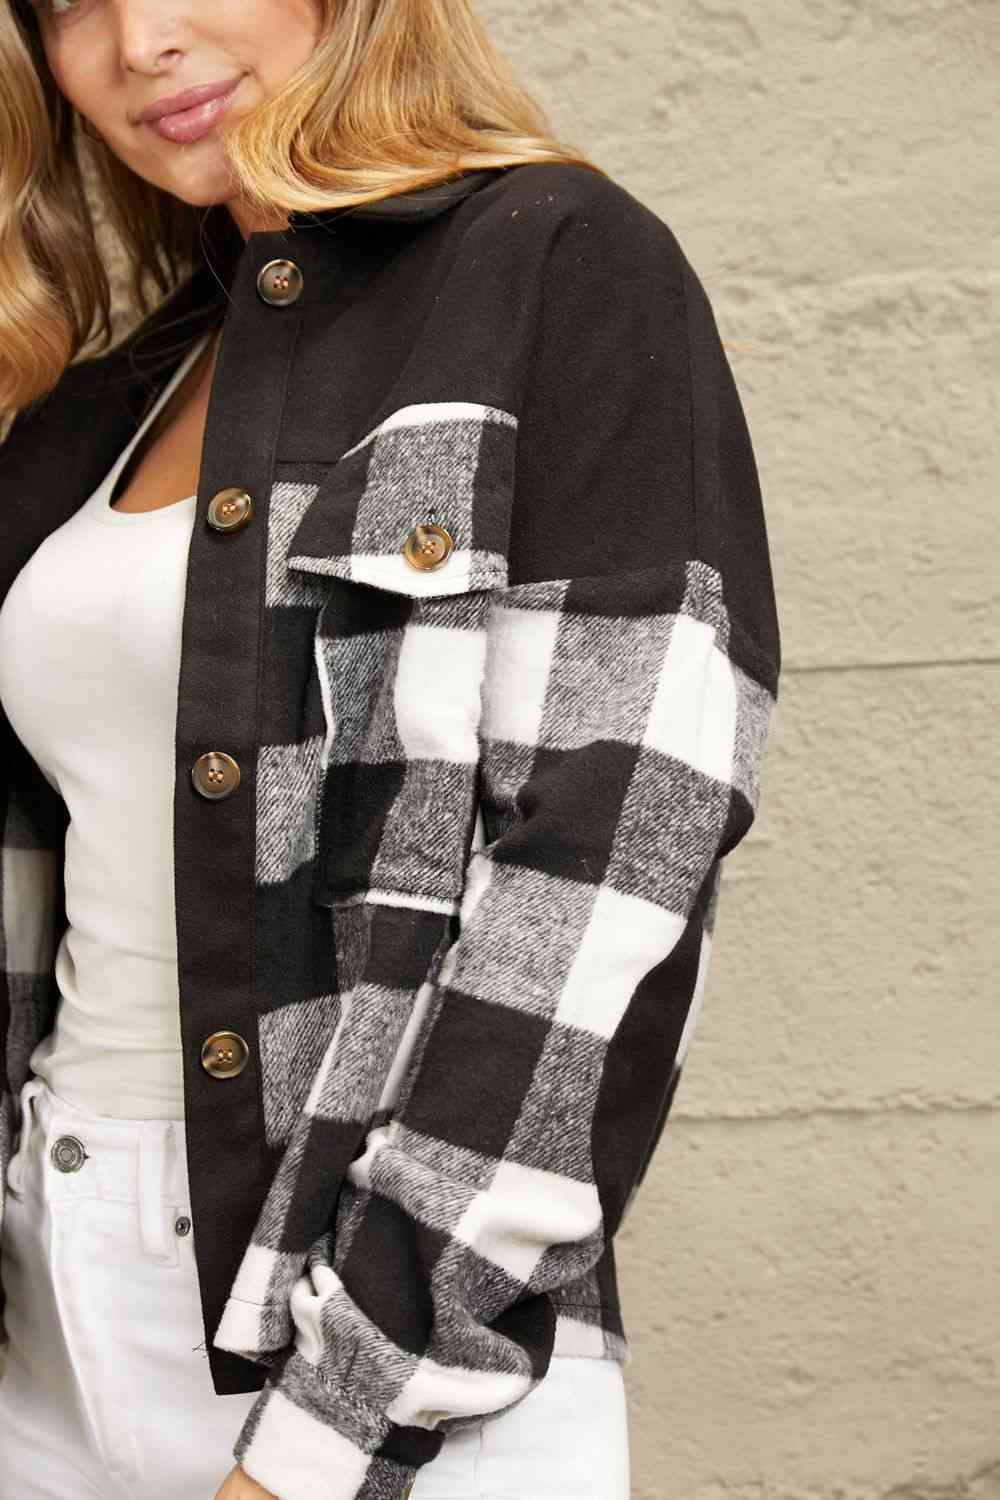 Double Take Plaid Button-Up Shirt Jacket with Pockets